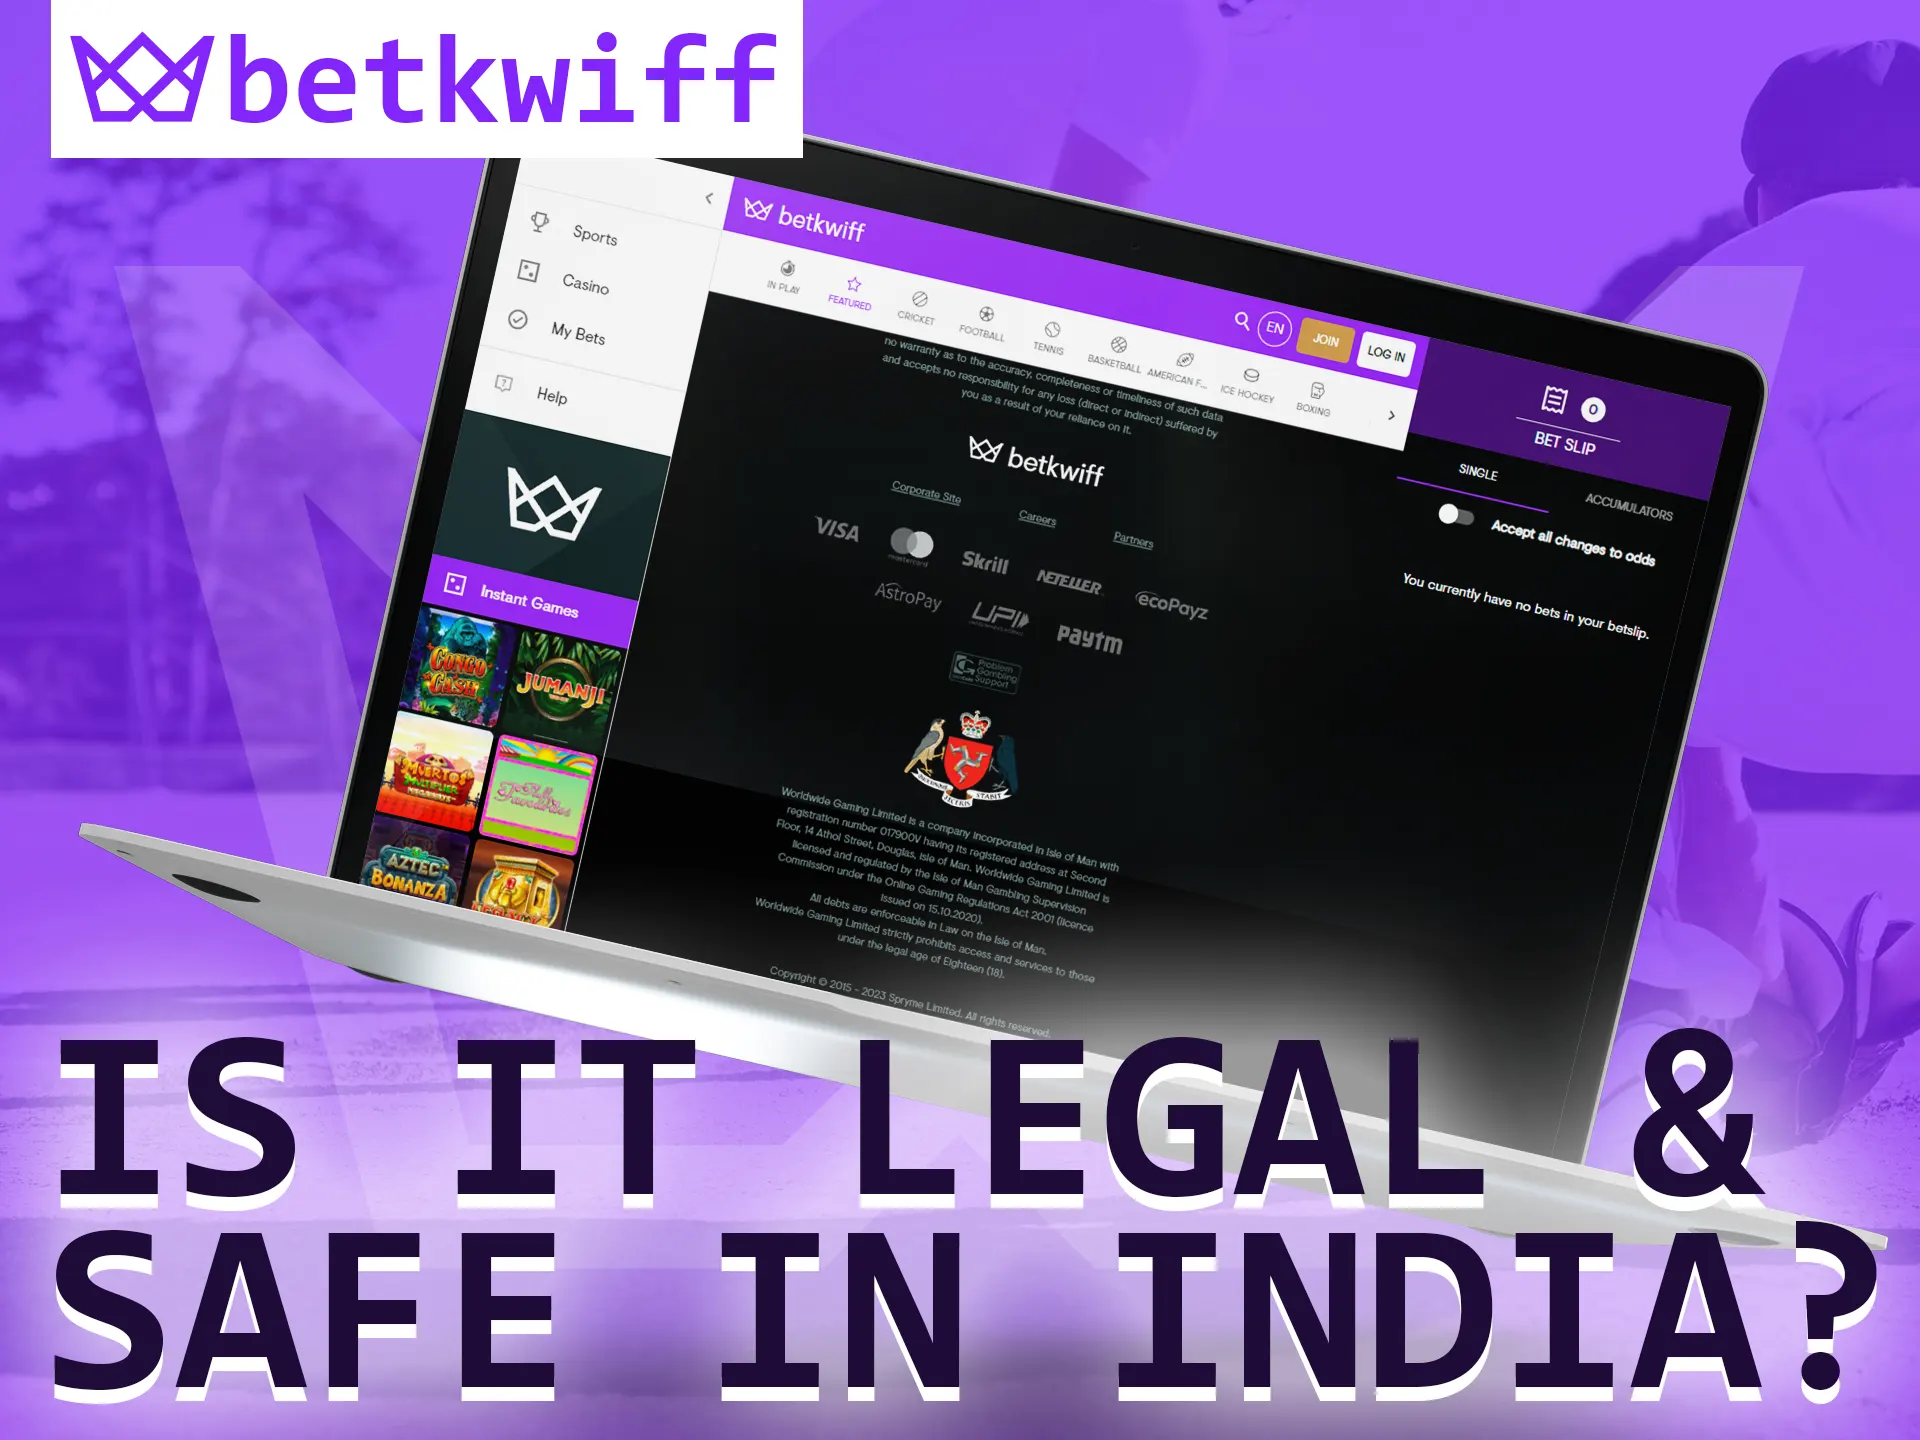 Betkwiff is legal and safe for players.